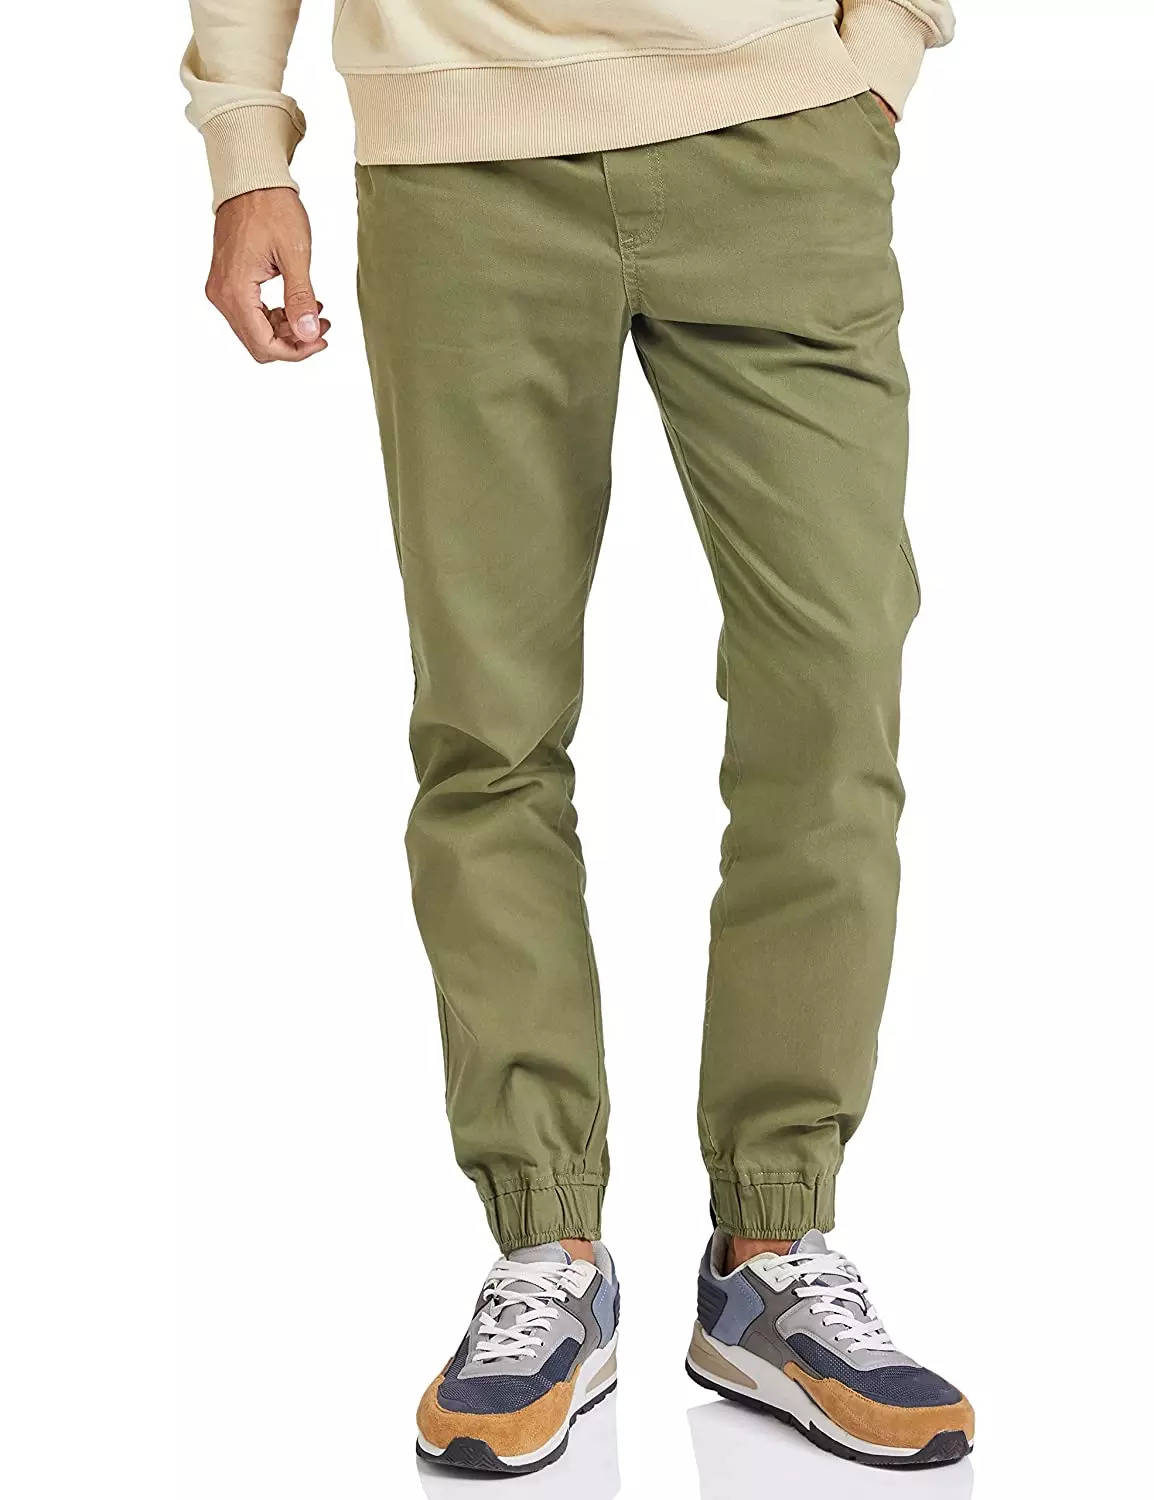 Best Chinos for Men: What to Look For and Where to Buy | TIME Stamped